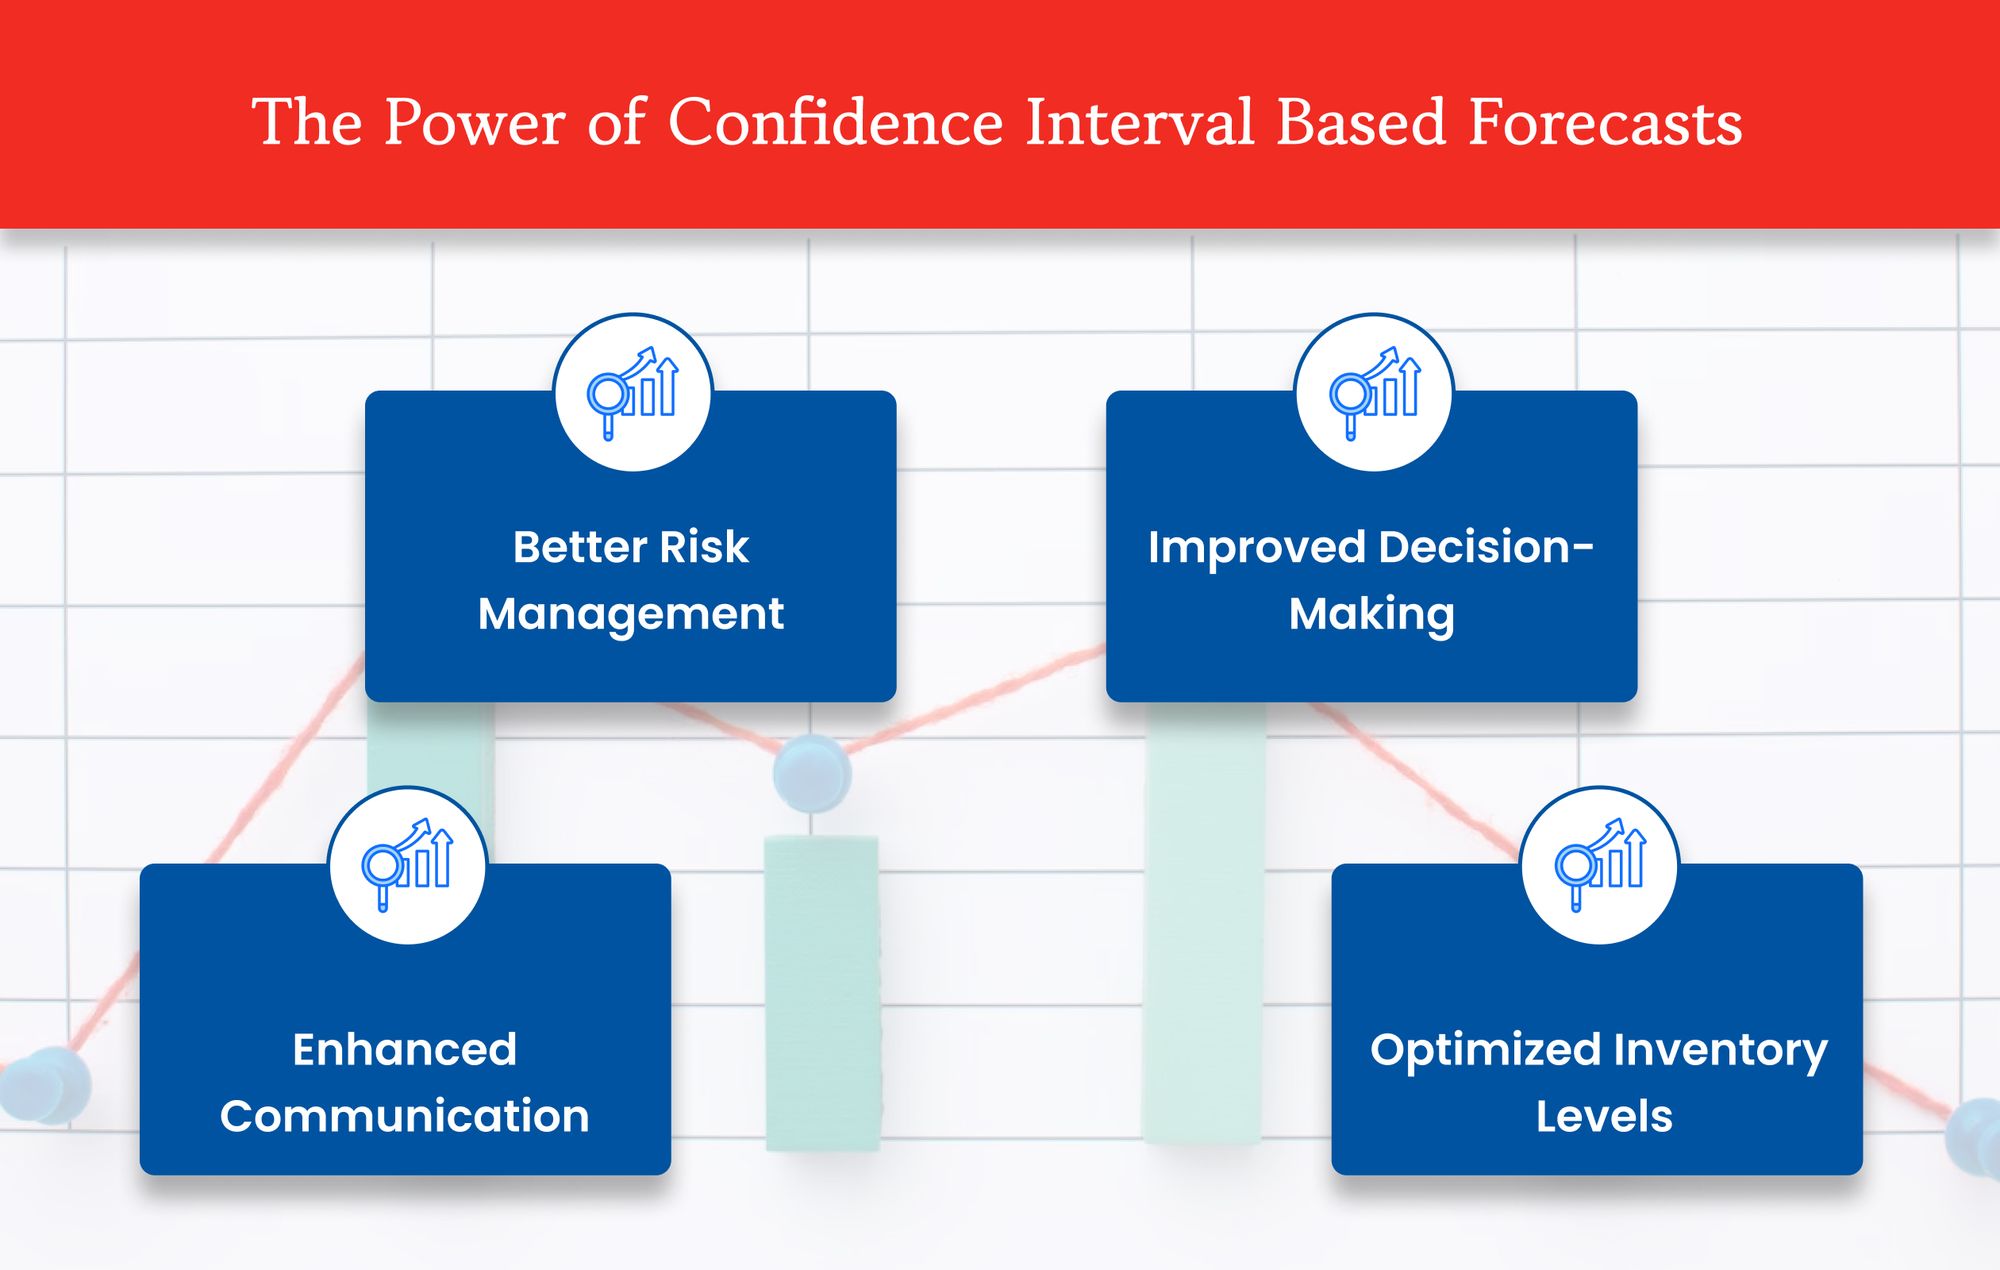 The Power of Confidence Interval Based Forecasts